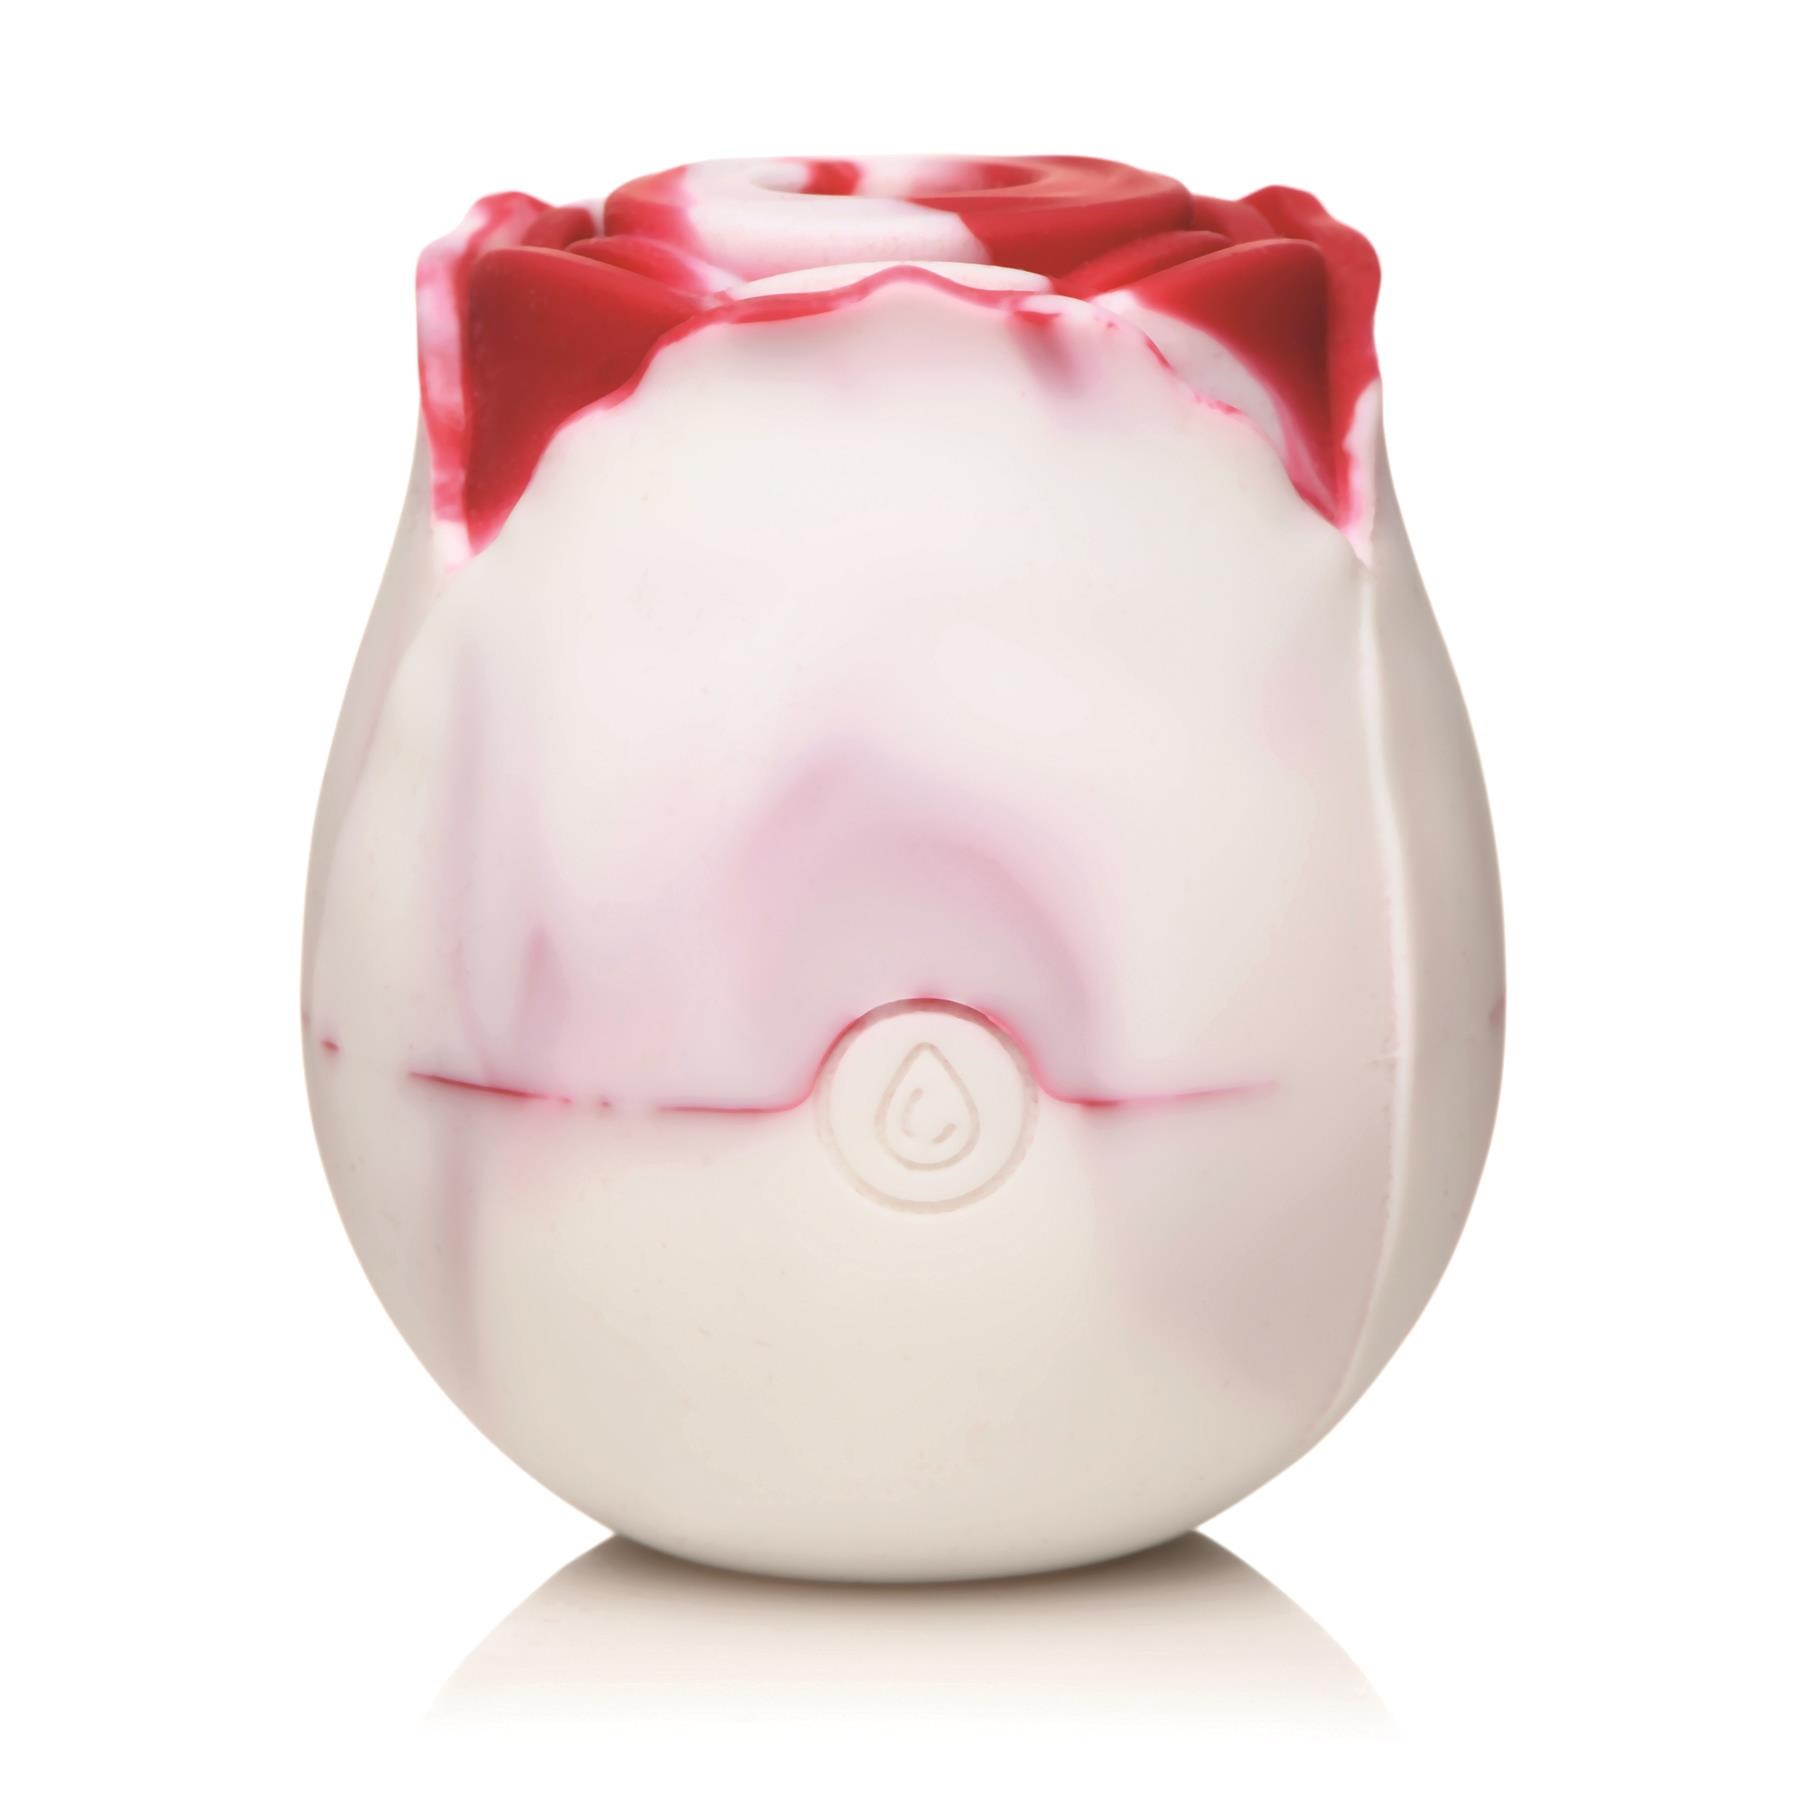 Bloomgasm Rose Lover's Heart Gift Box - Rose Vibrator Shot - Red and White